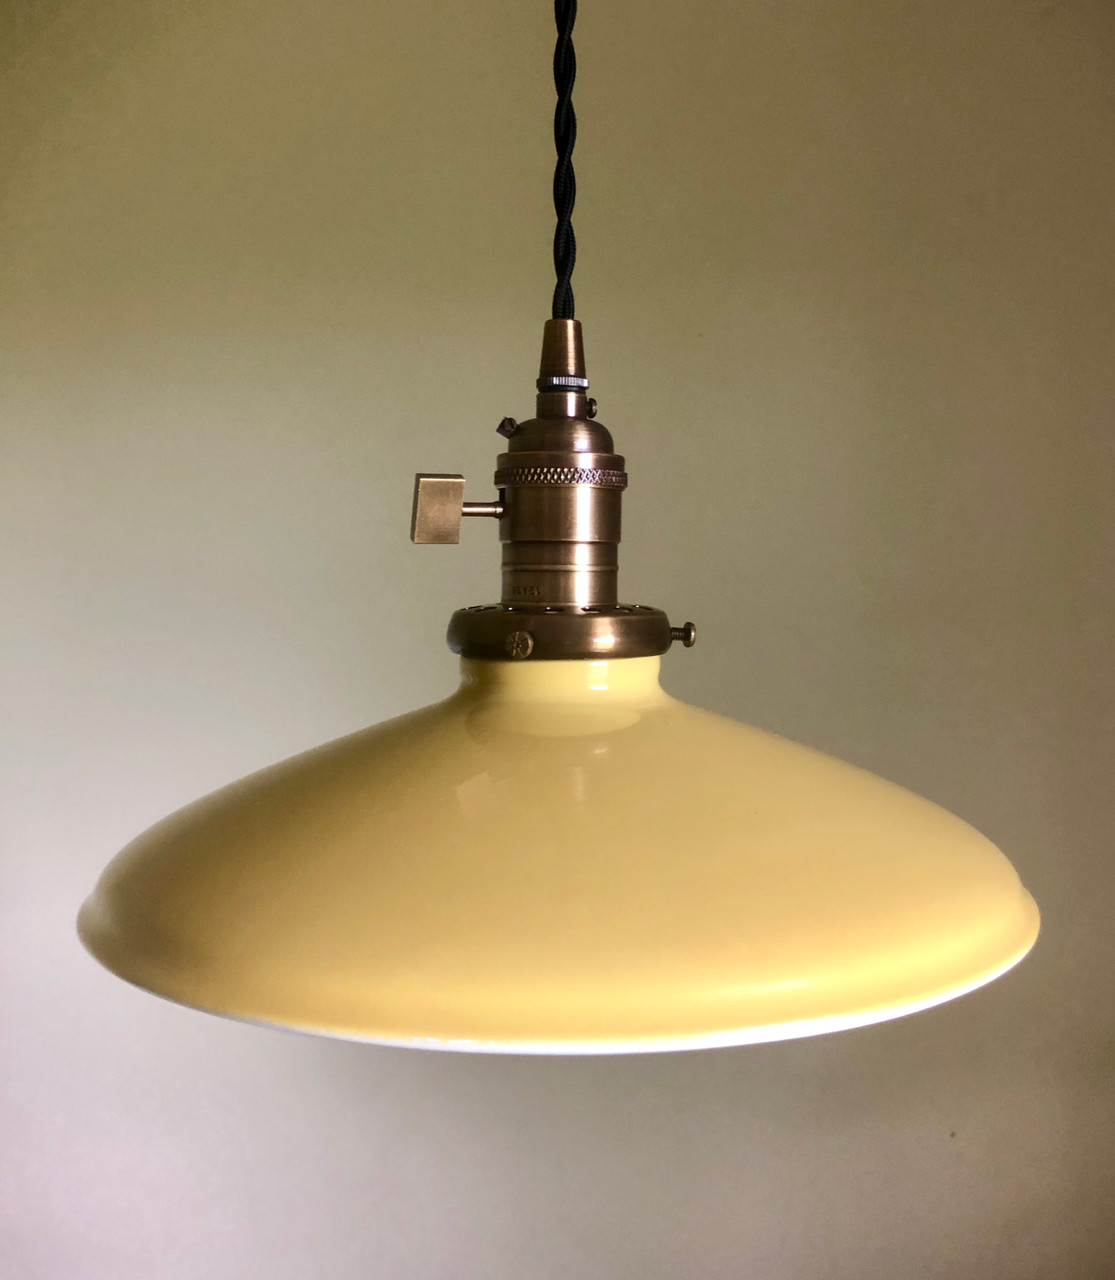 7" Industrial Dome 2-1/4" fitter Metal Lampshade Yellow Porcelain Enamel Shade 